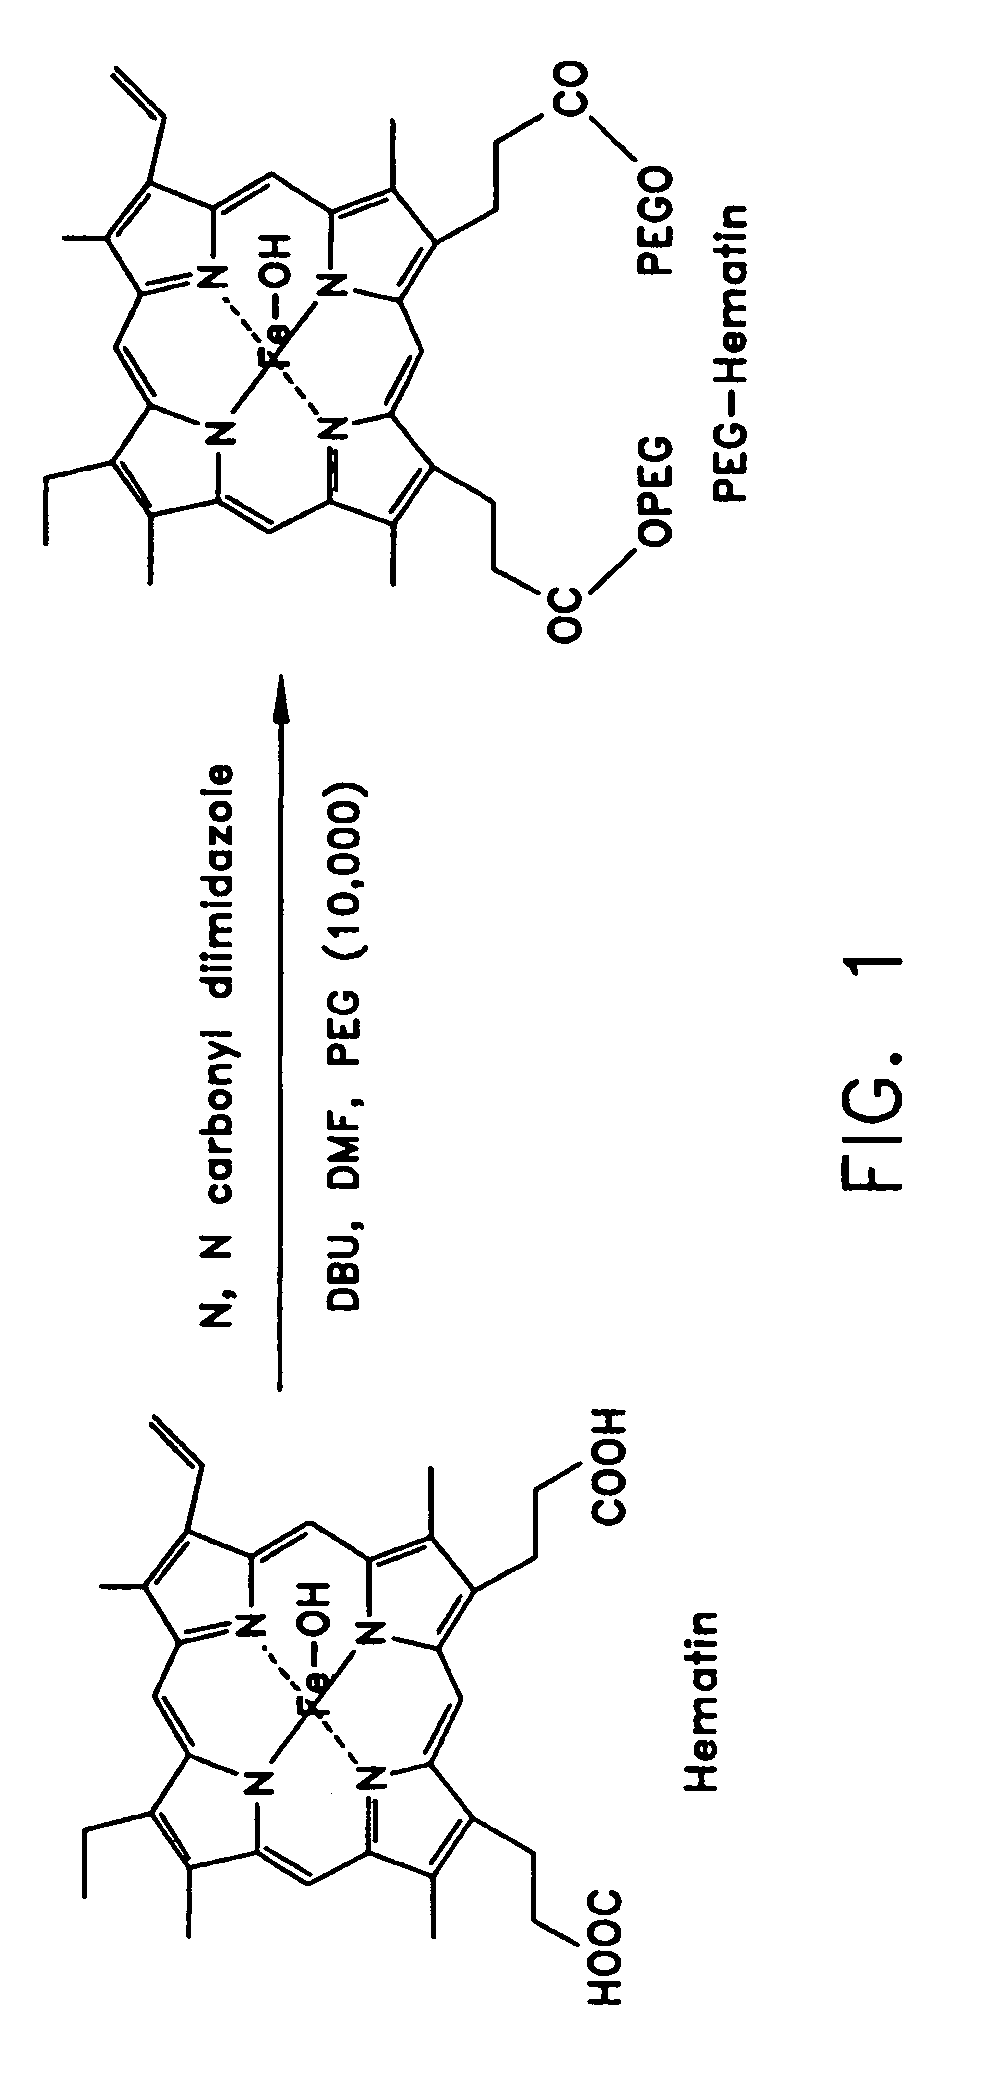 Assembled hematin, method for forming same and method for polymerizing aromatic monomers using same